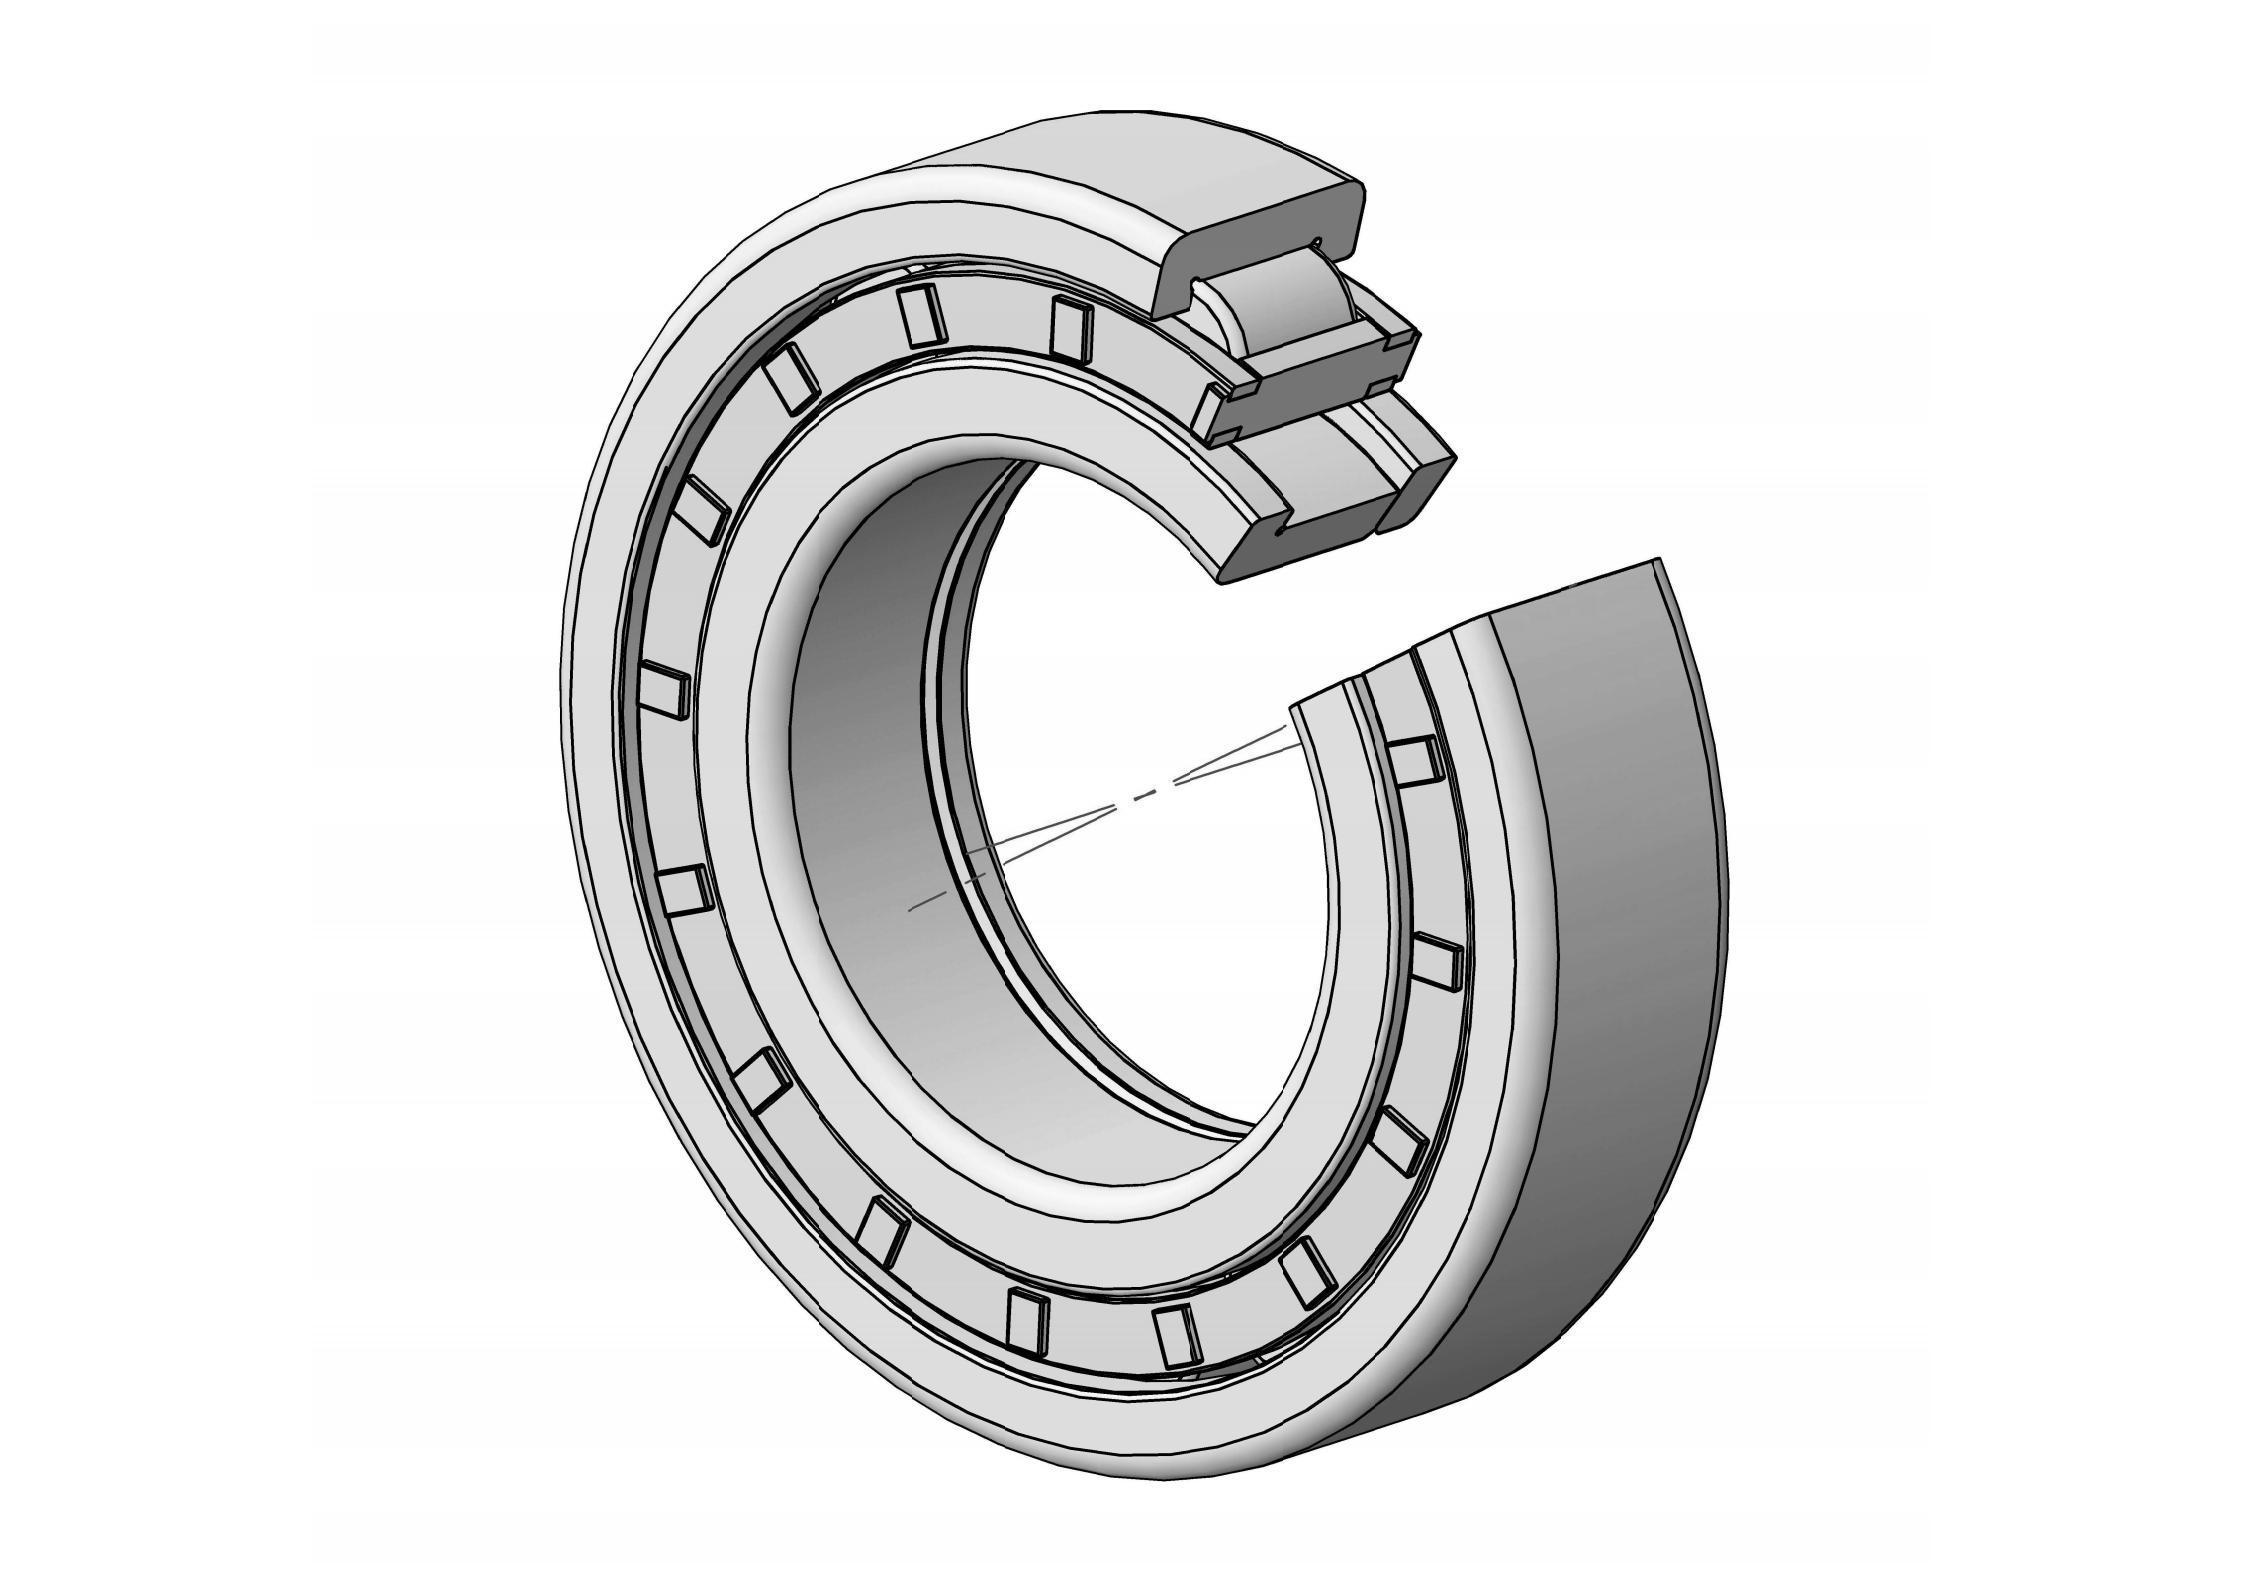 NUP228-EM Single Row Cylindrical roller bearing